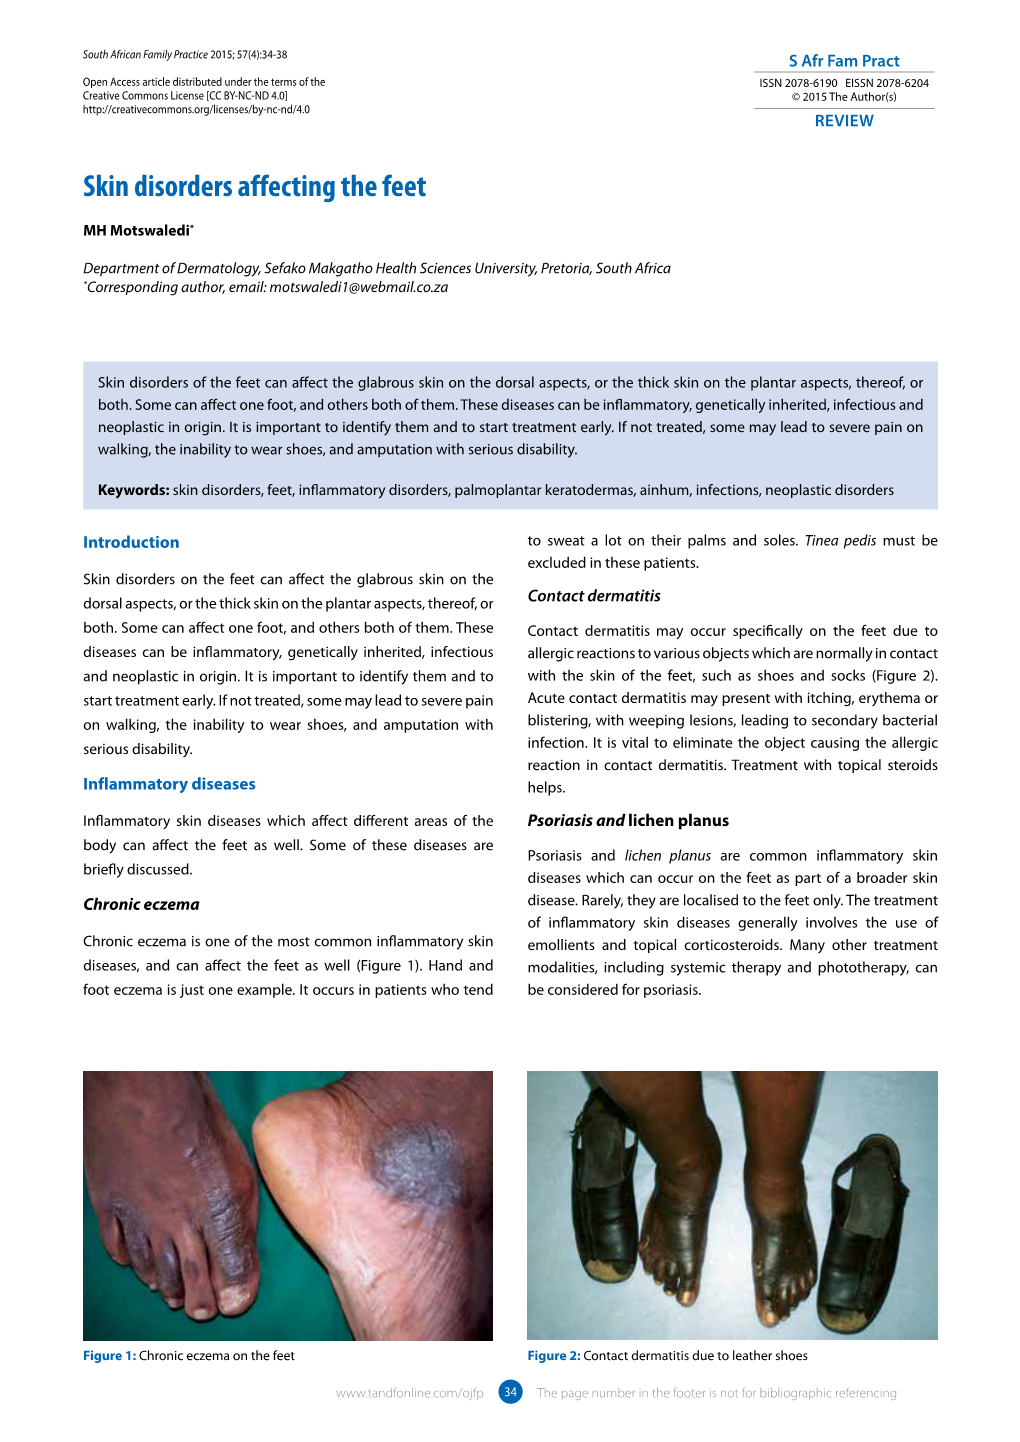 Skin Disorders Affecting the Feet